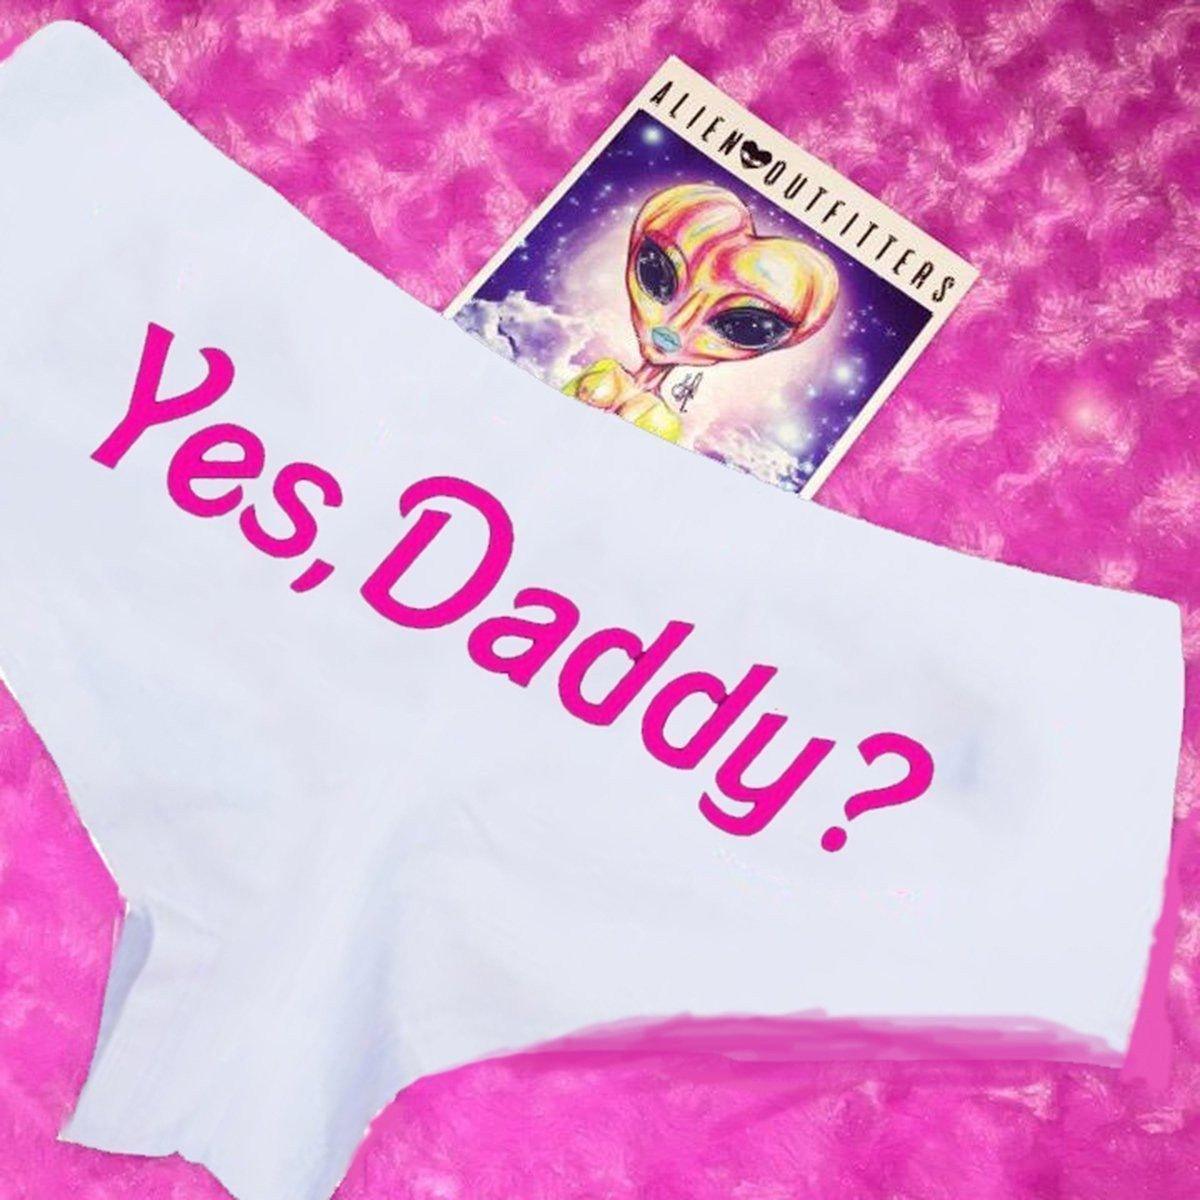 Yes Daddy? Cotton Panties